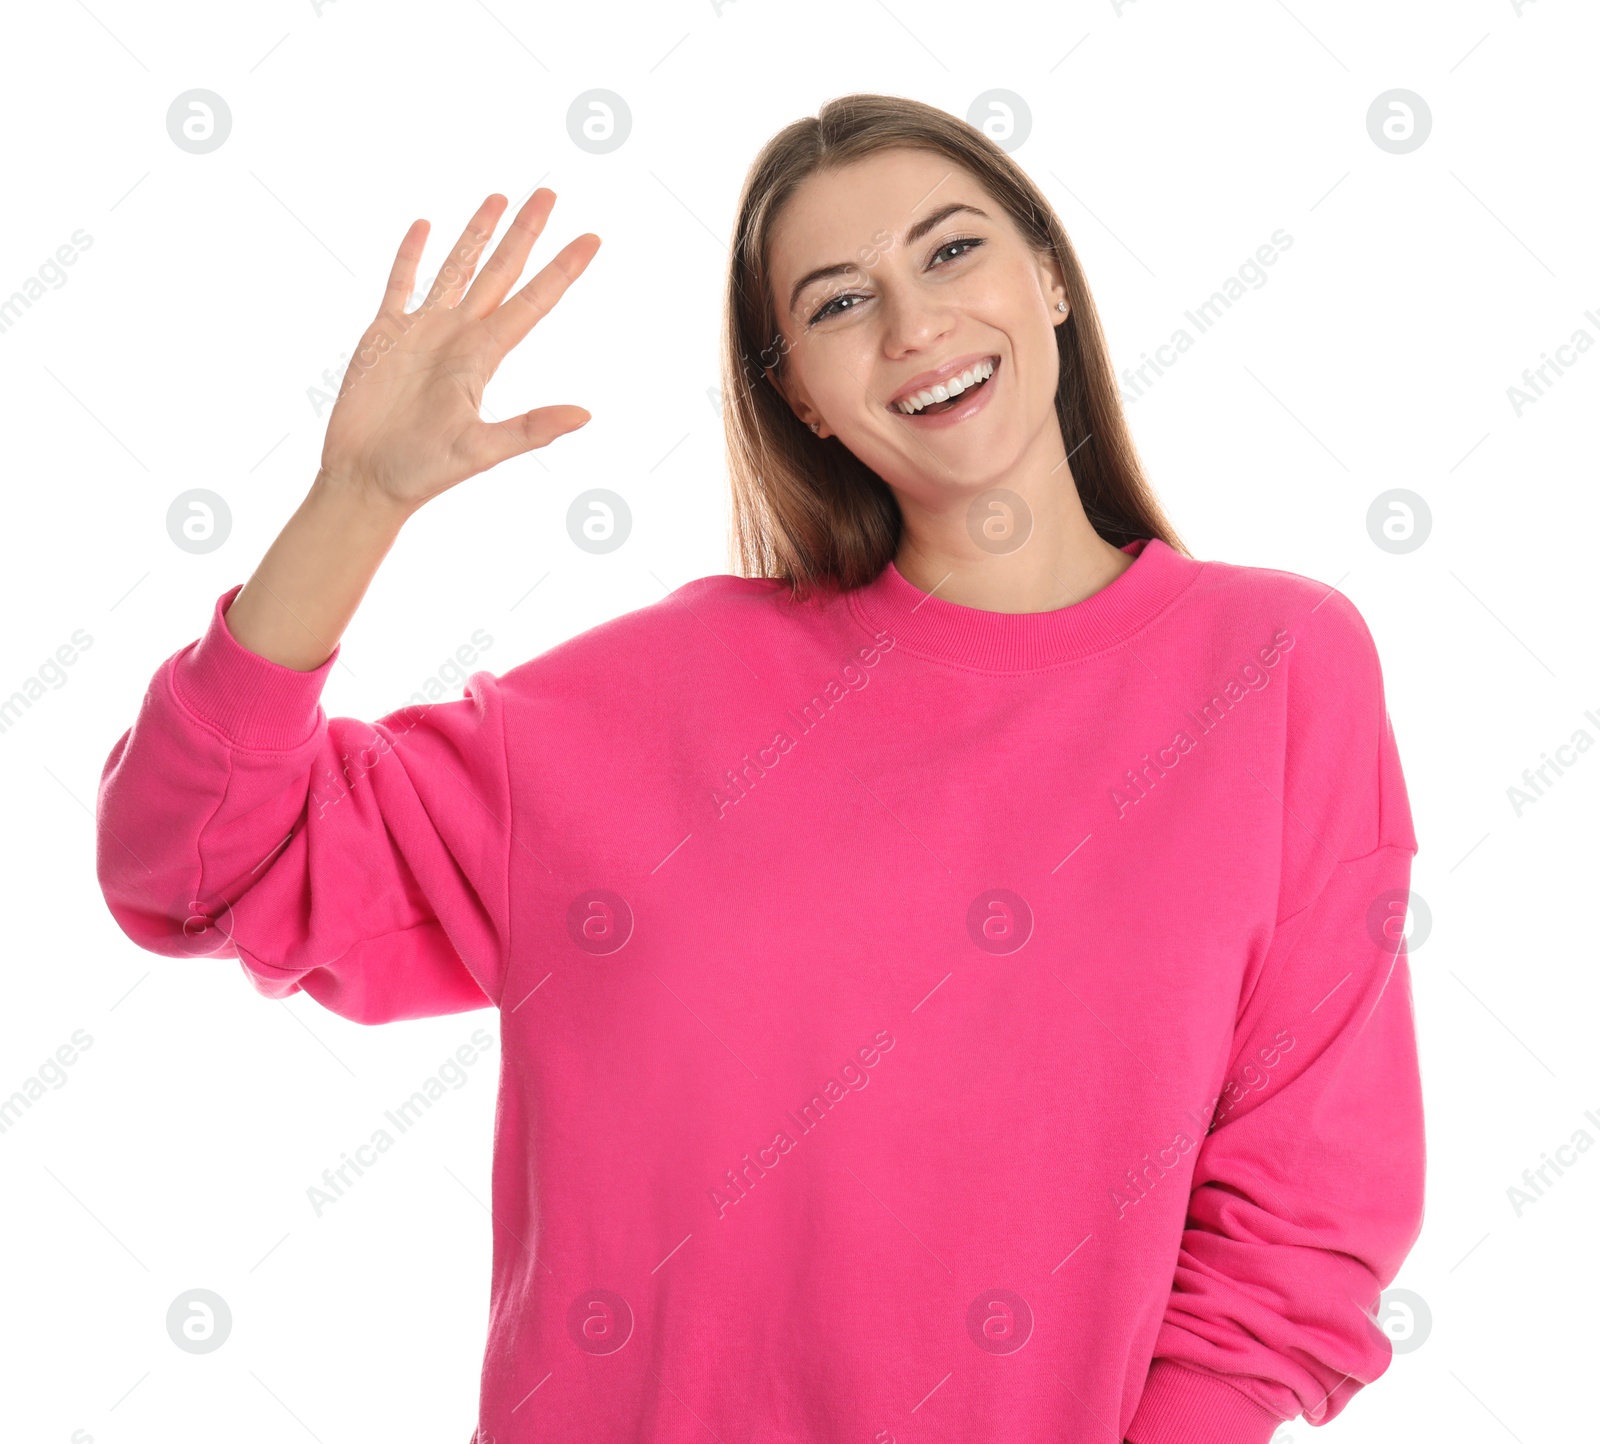 Photo of Woman showing number five with her hand on white background